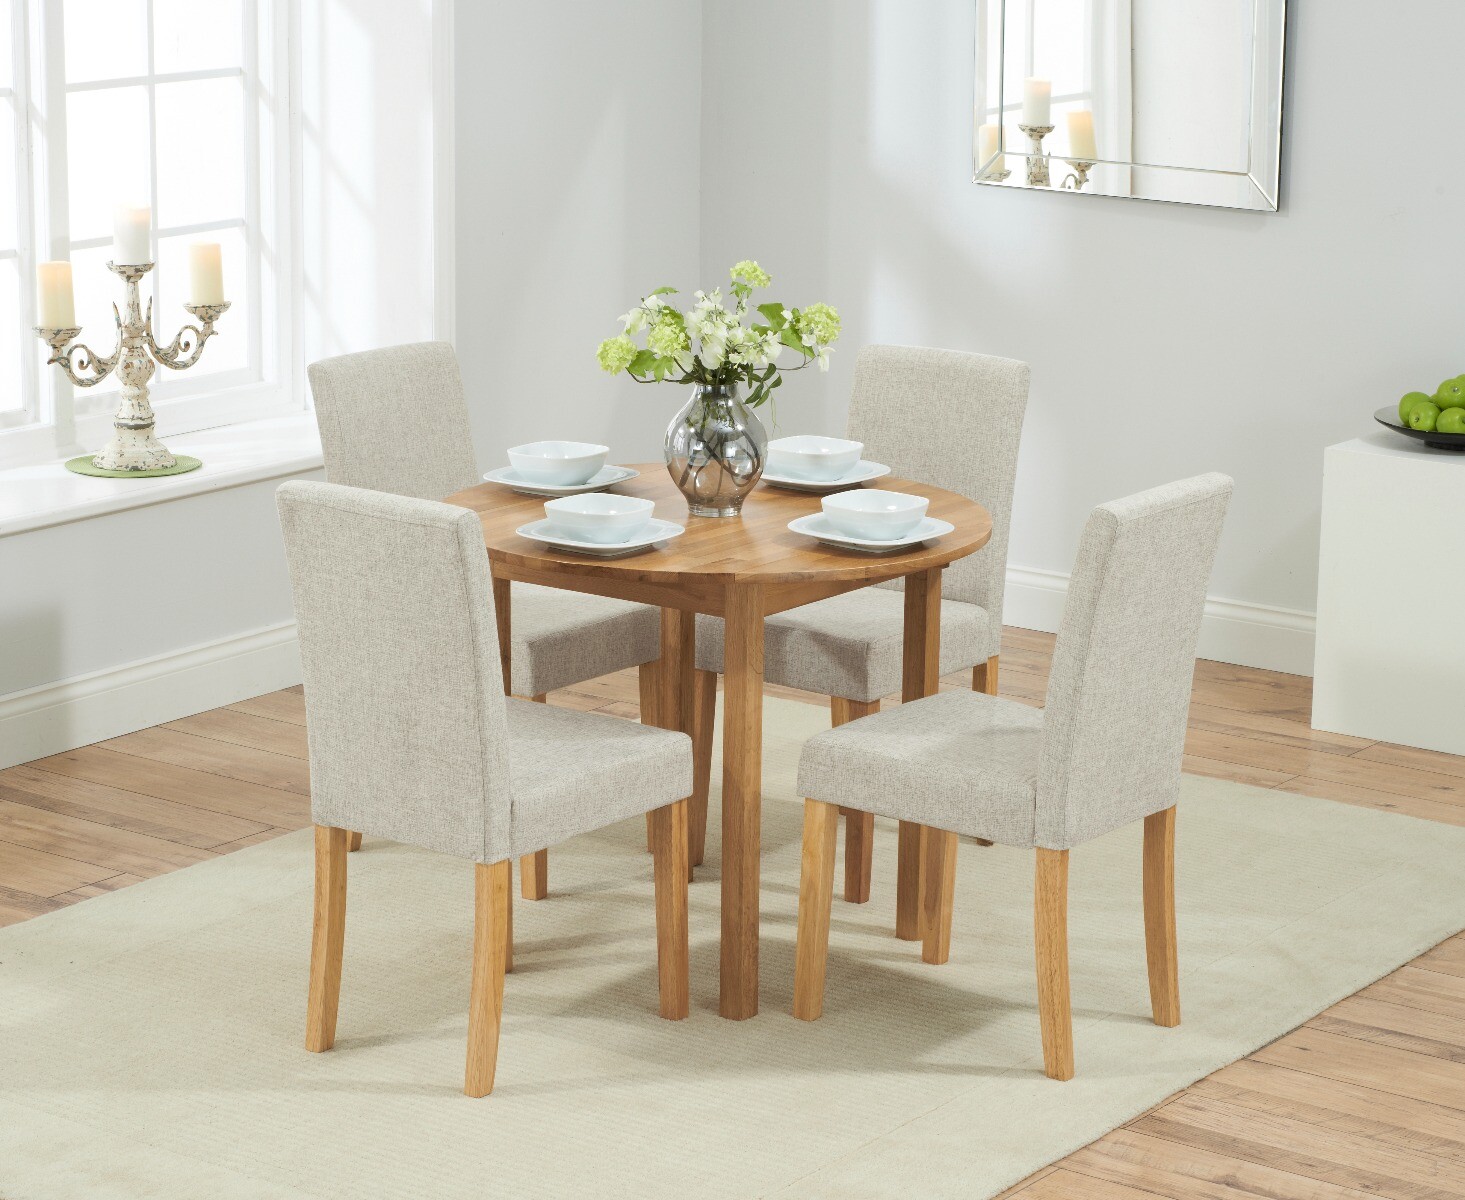 Extending York 90cm Solid Oak Dining Table With 4 Natural Lila Chairs